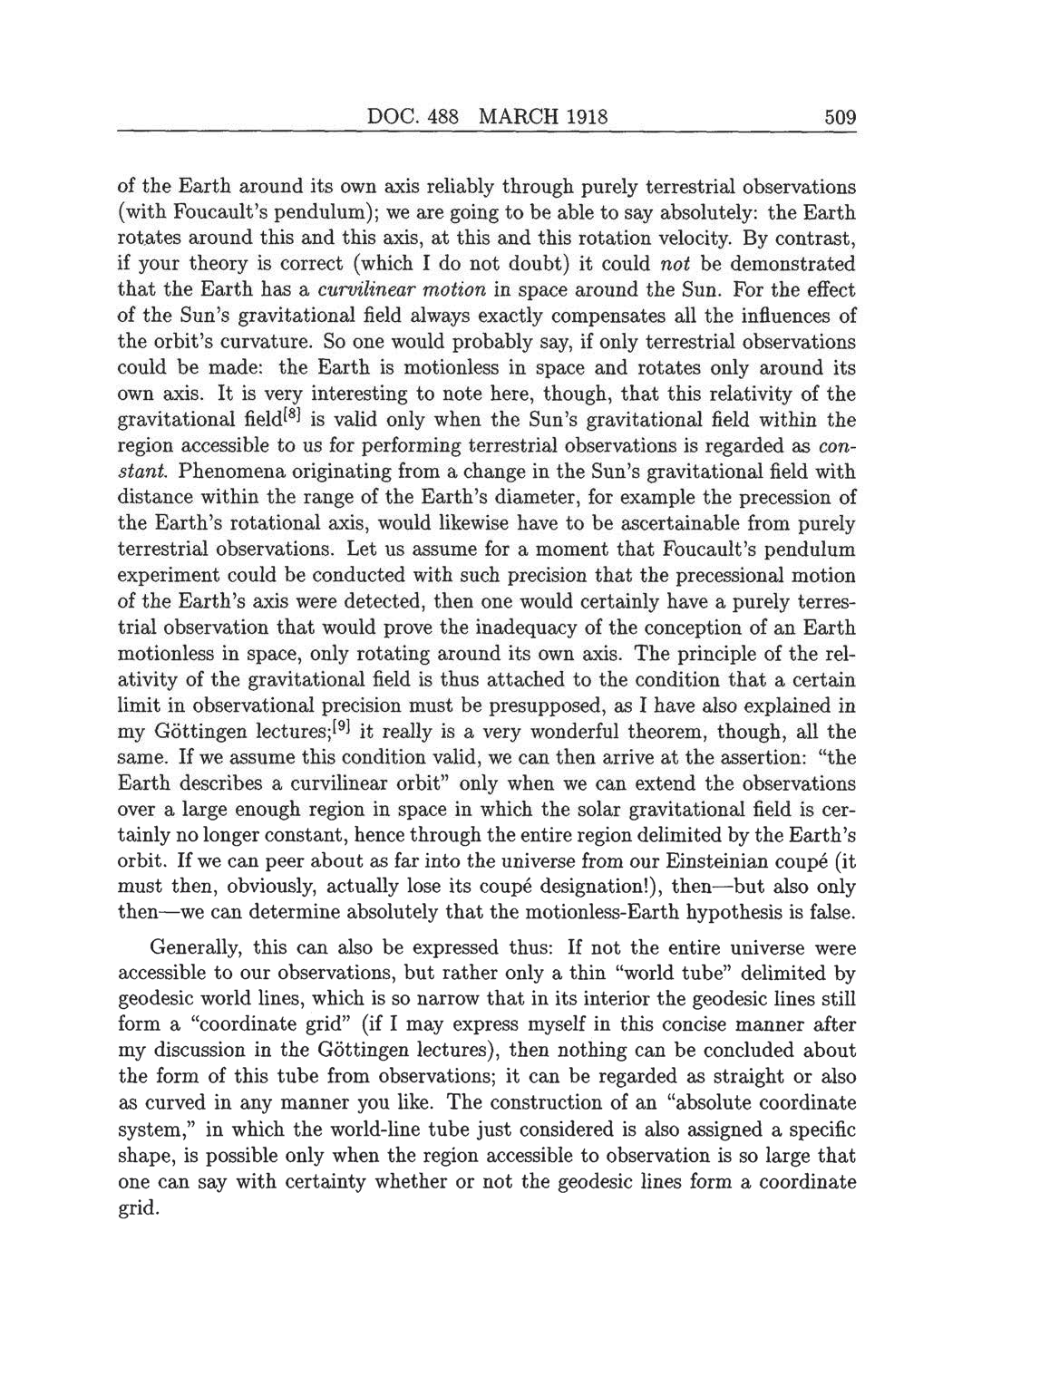 Volume 8: The Berlin Years: Correspondence, 1914-1918 (English translation supplement) page 509